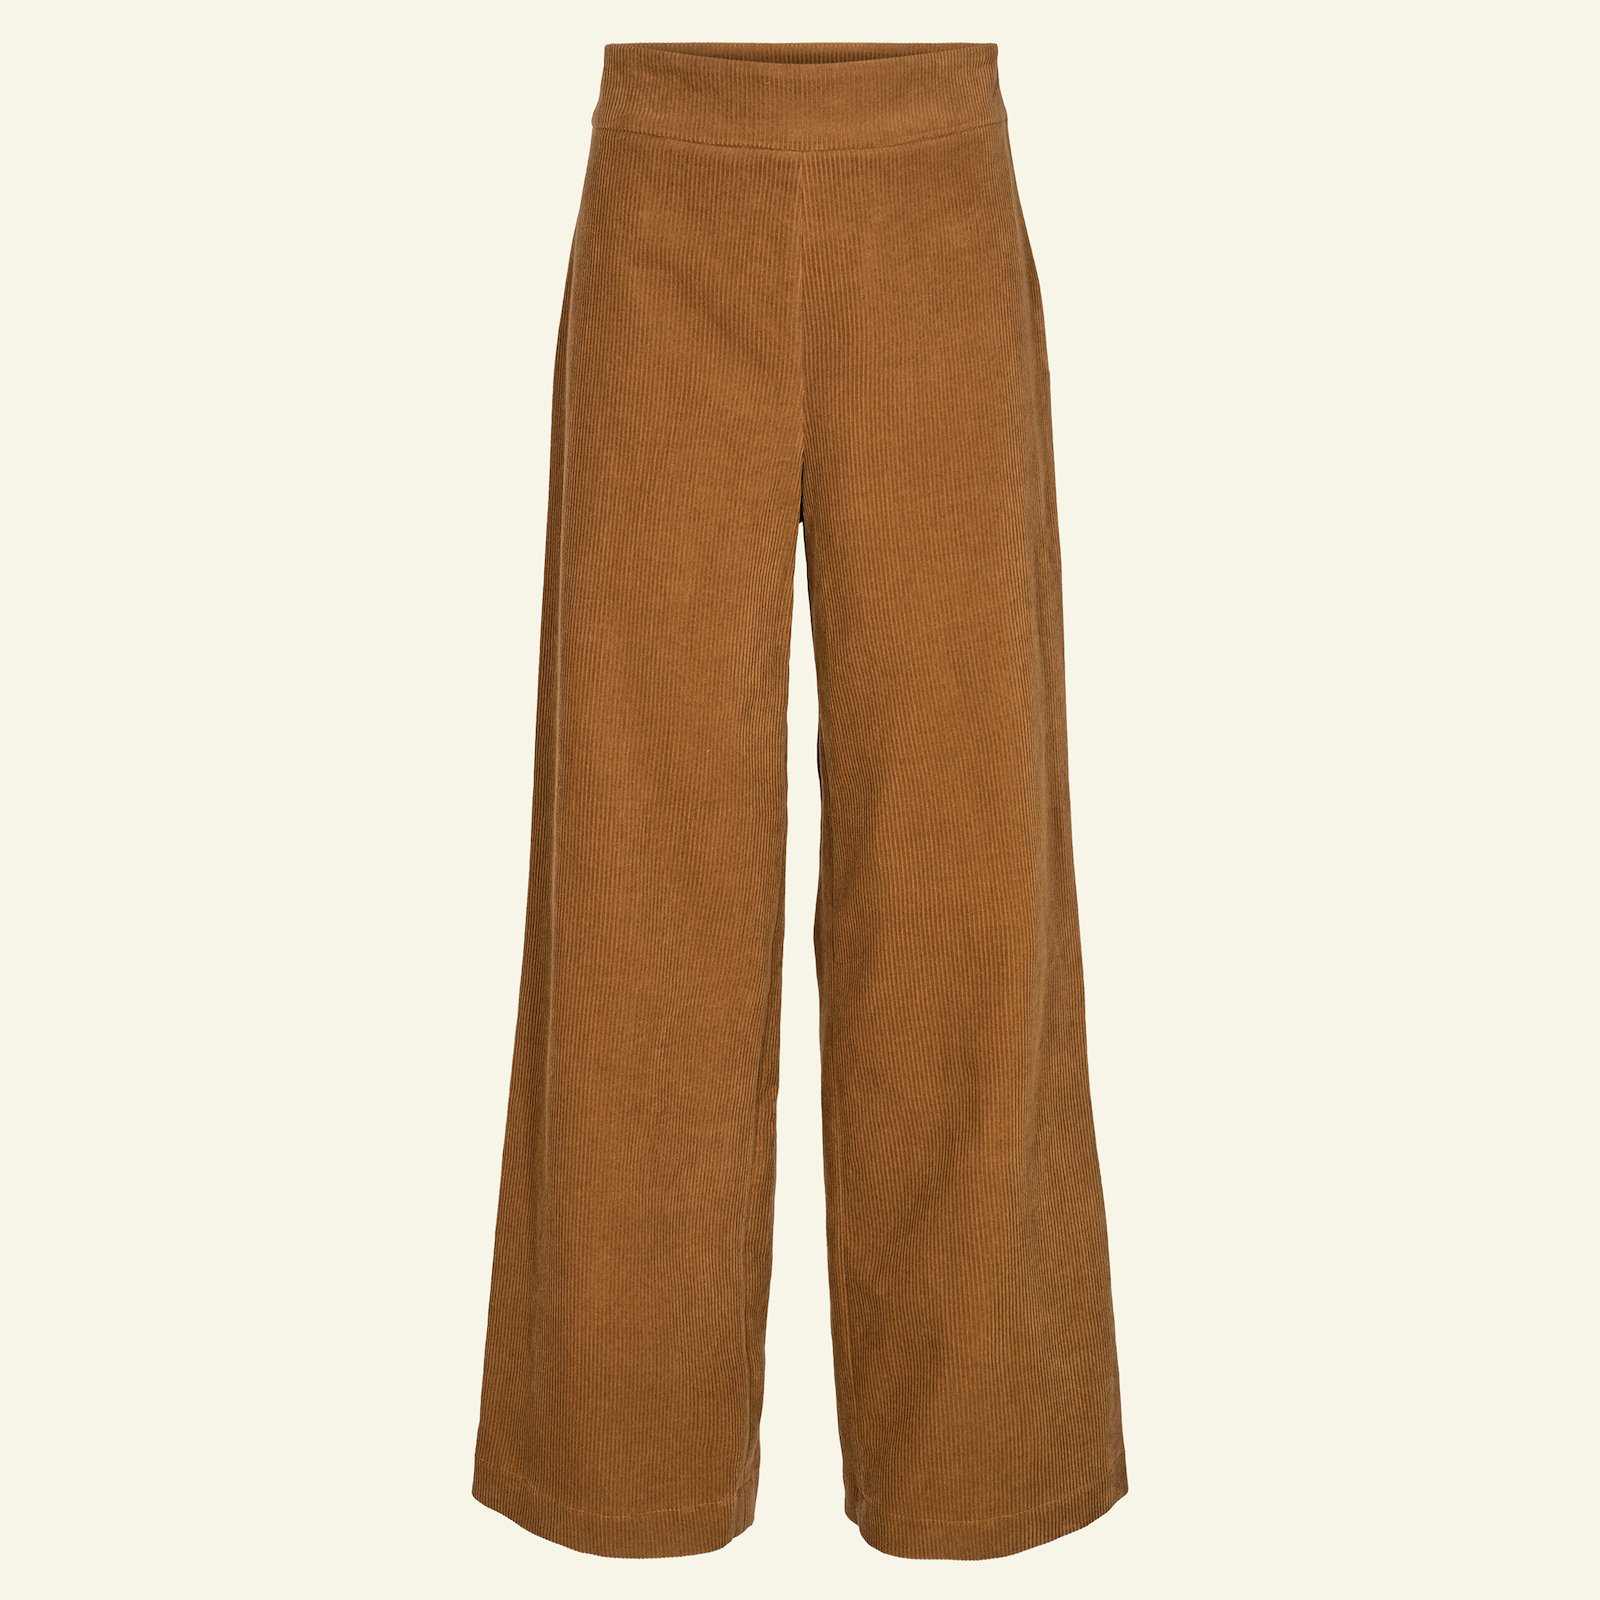 Highwaist and wide legs trousers, 44/16 p20052_430810_sskit